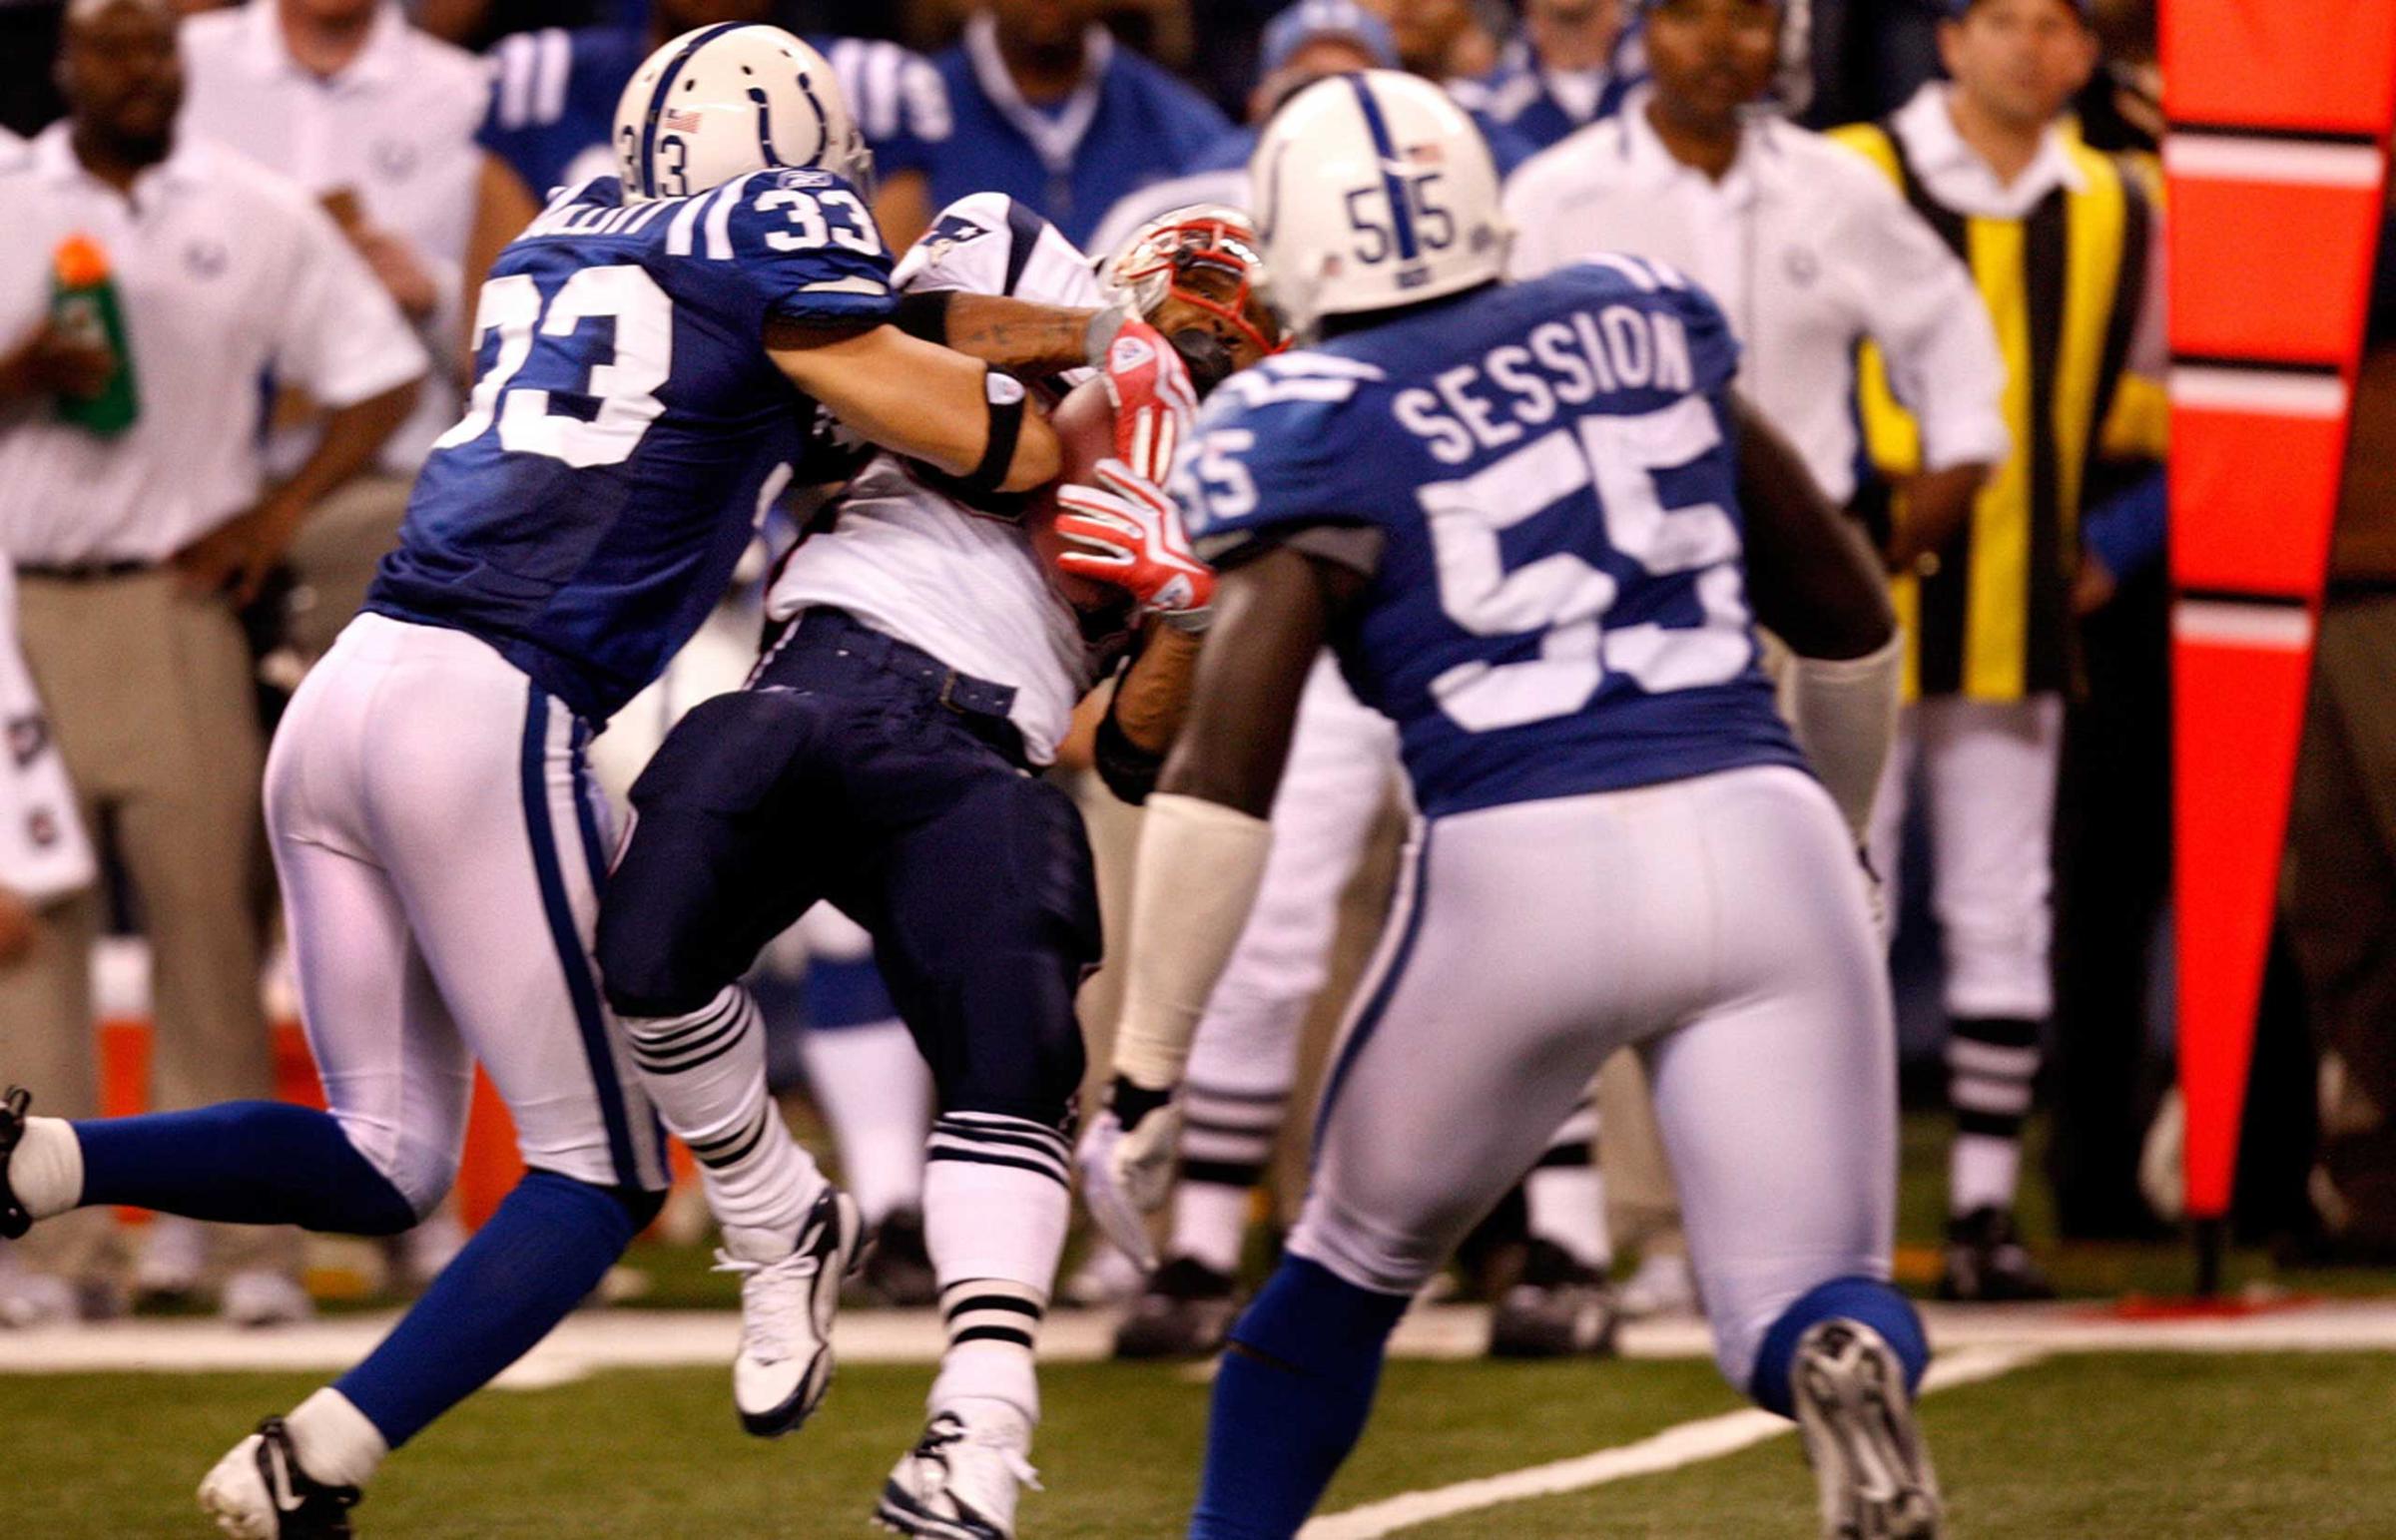 INDIANAPOLIS - NOVEMBER 15: New England Patriots running back Kevin Faulk (#33) makes the reception but it was marked just short of a first down as the New England Patriots face the Indianapolis Colts at Lucas Oil Stadium. The Patriots had to turn the ball over to the Colts, who went on to score. (Photo by /The Boston Globe via Getty Images)